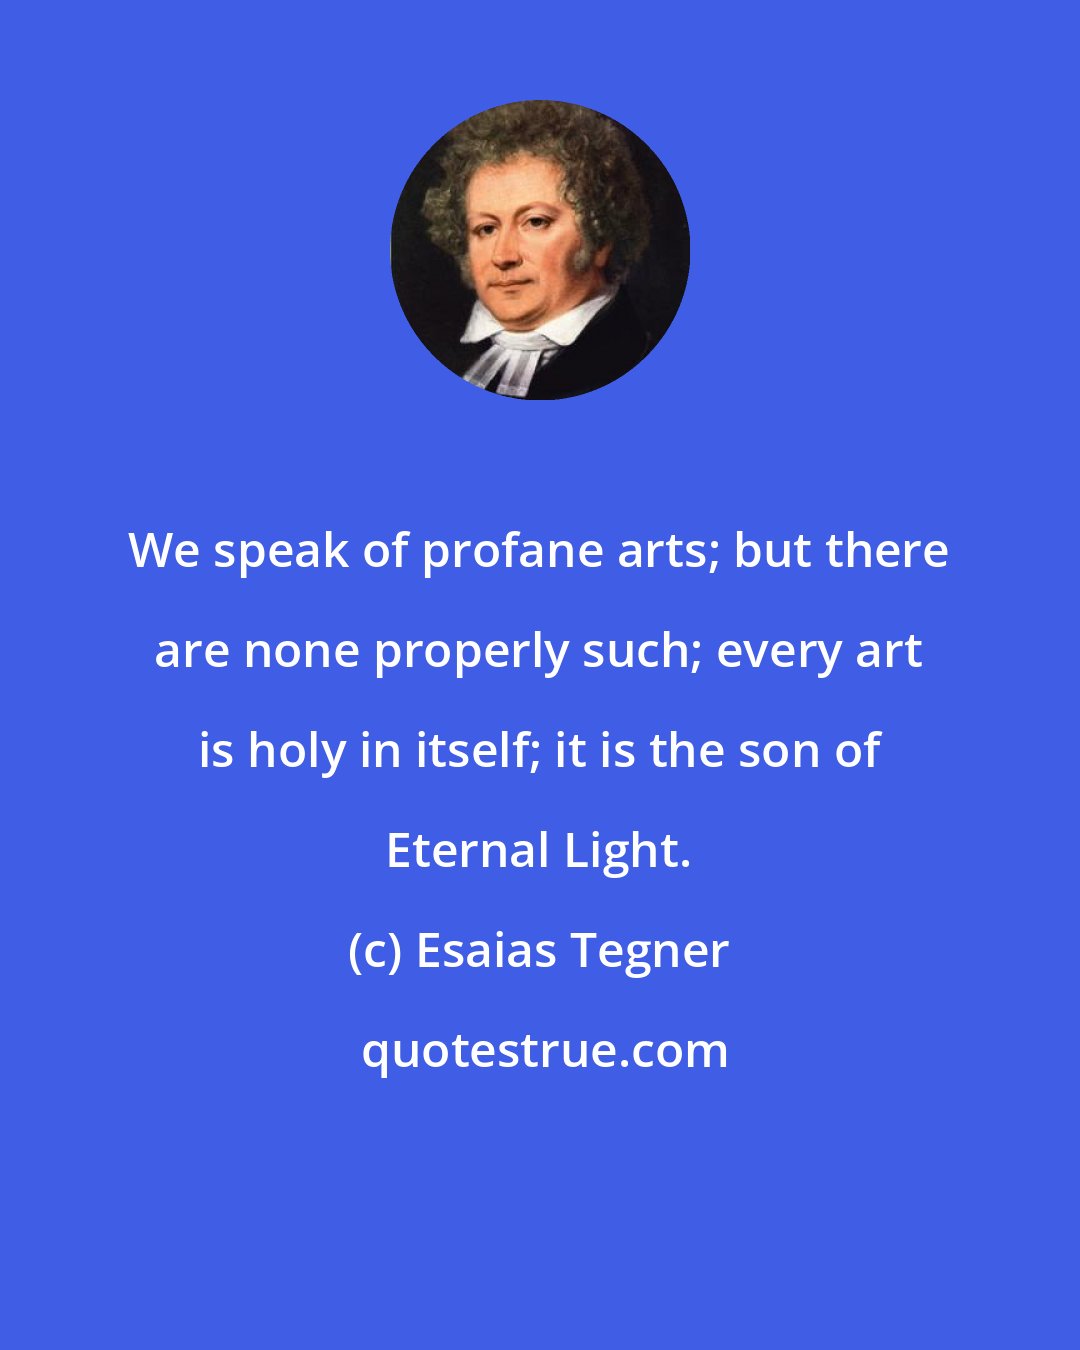 Esaias Tegner: We speak of profane arts; but there are none properly such; every art is holy in itself; it is the son of Eternal Light.